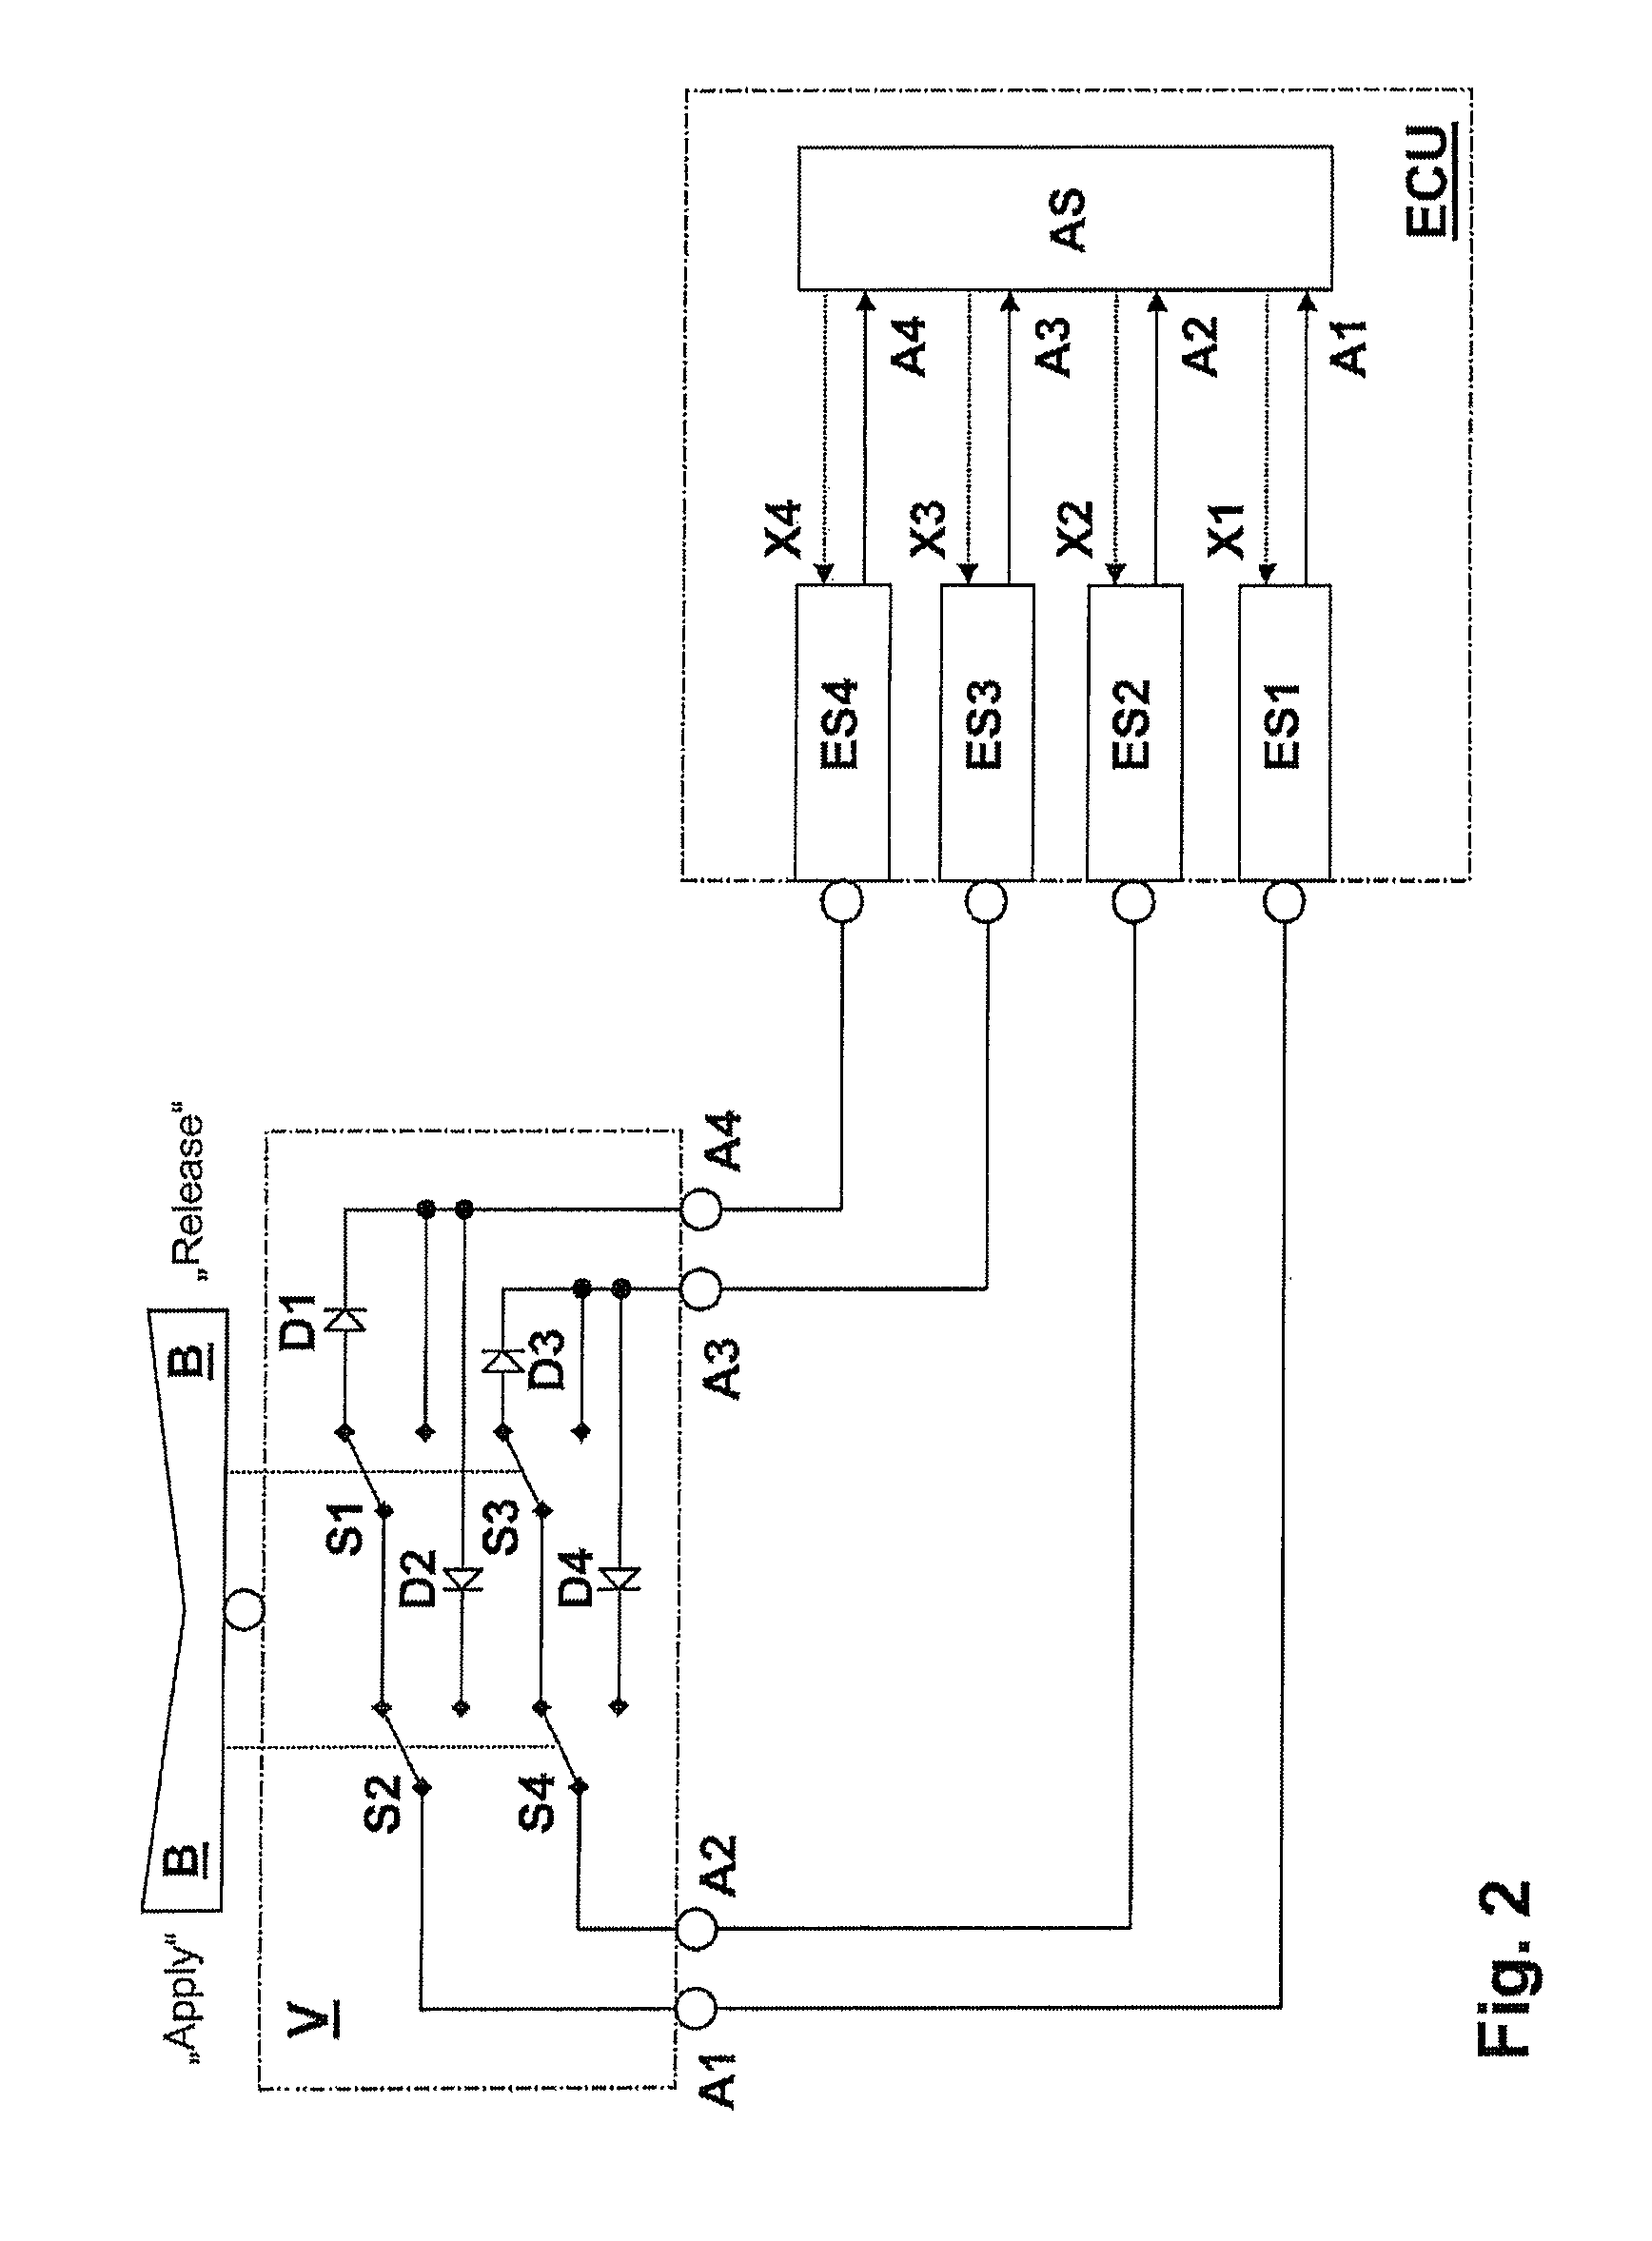 Device for the electric actuation of a safety-critical system